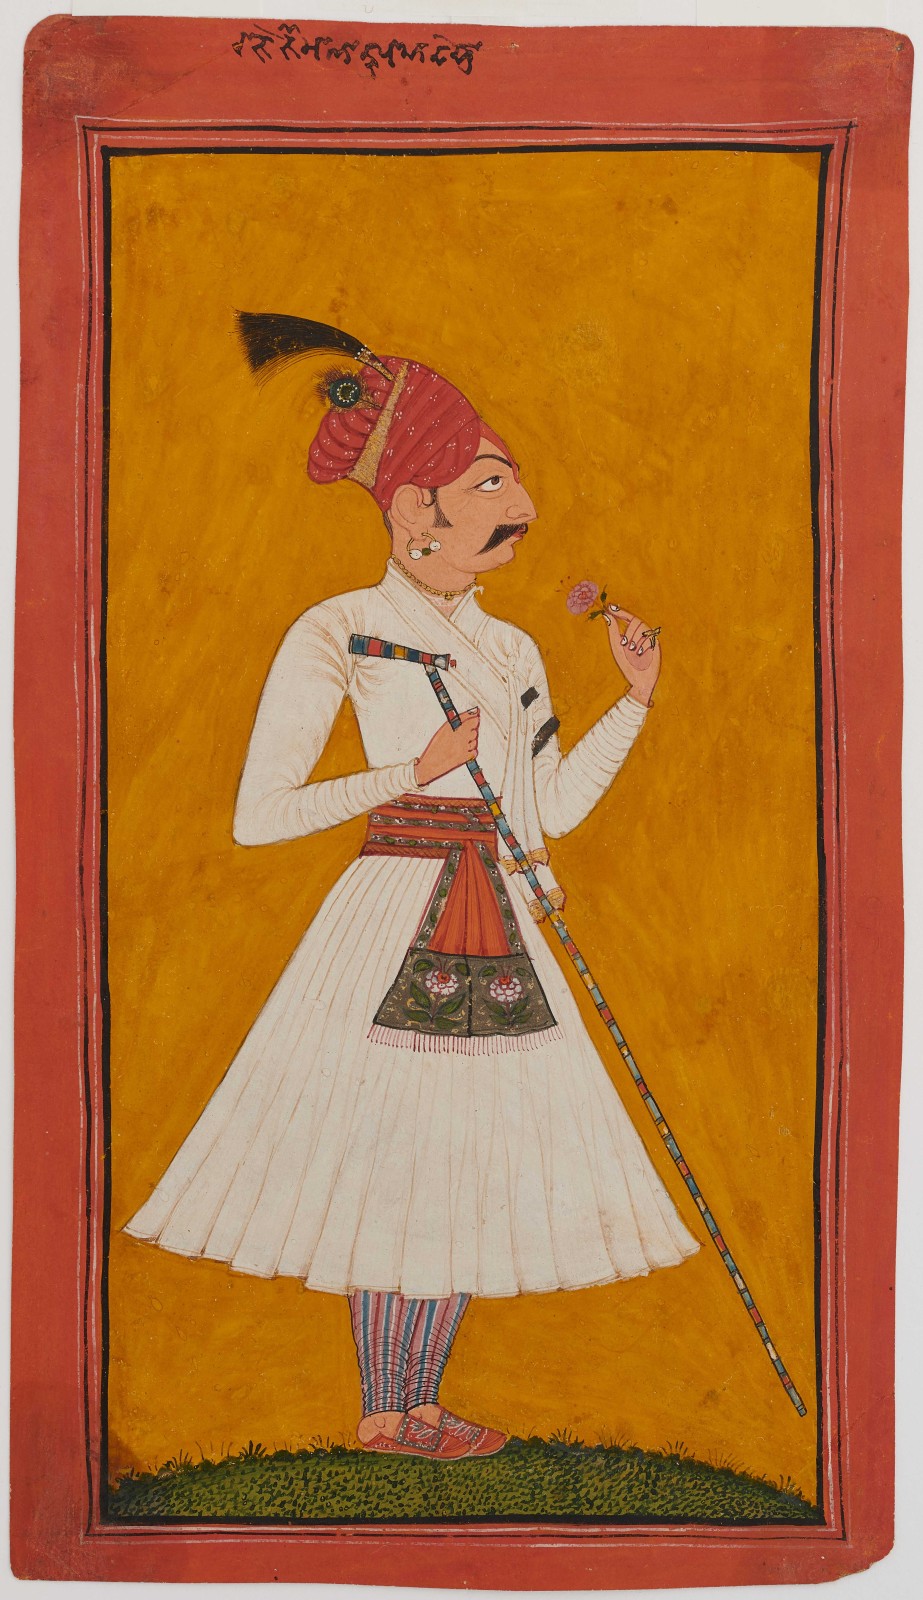 Courtier at the Mankot court, Workshop of the Master at the Court of Mankot, c. 1700